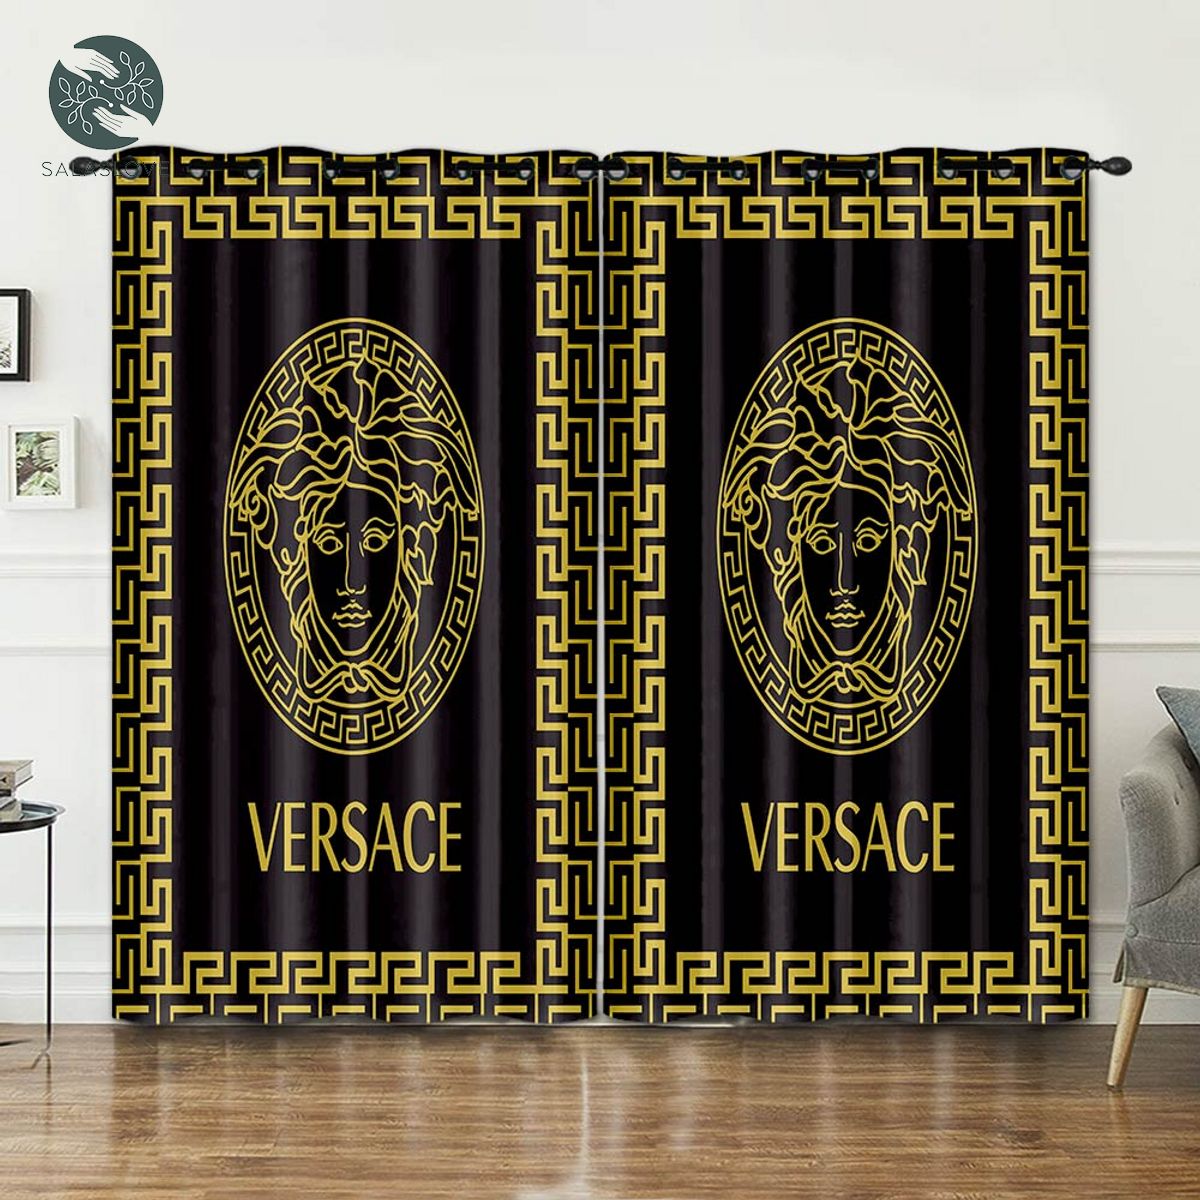 Versace Window Curtain And Shower Curtains 